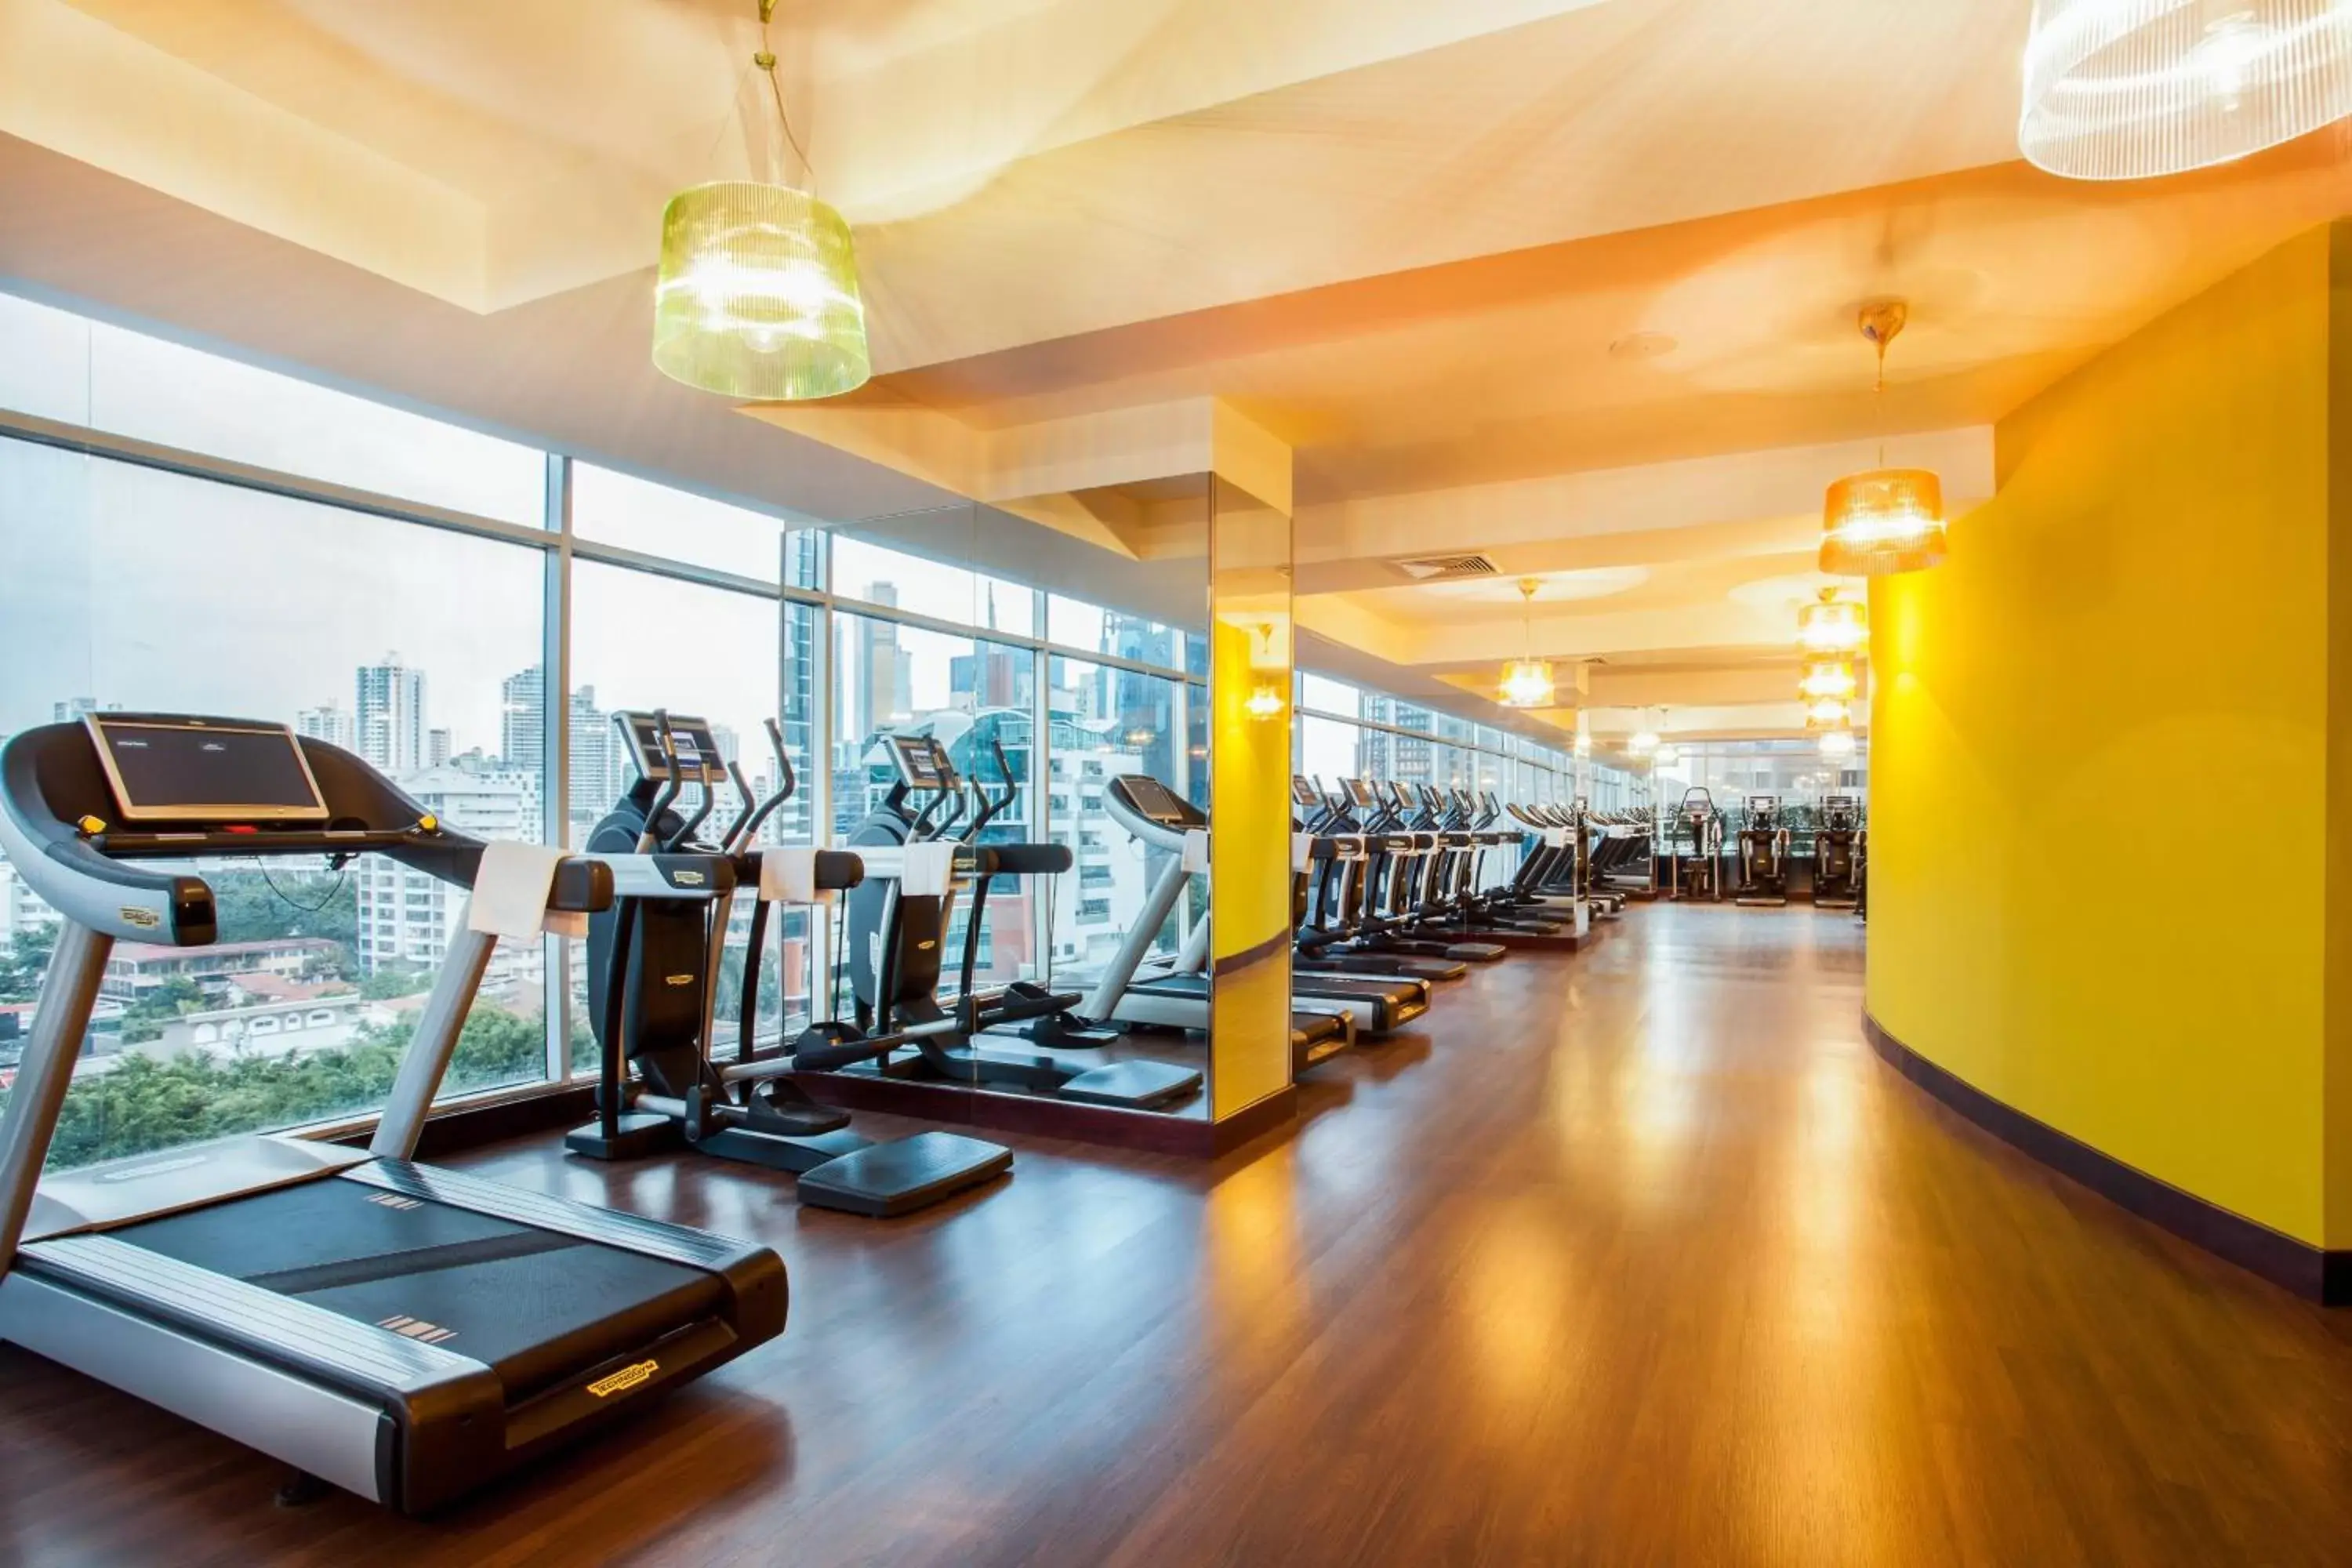 Fitness centre/facilities, Fitness Center/Facilities in Sortis Hotel, Spa & Casino, Autograph Collection